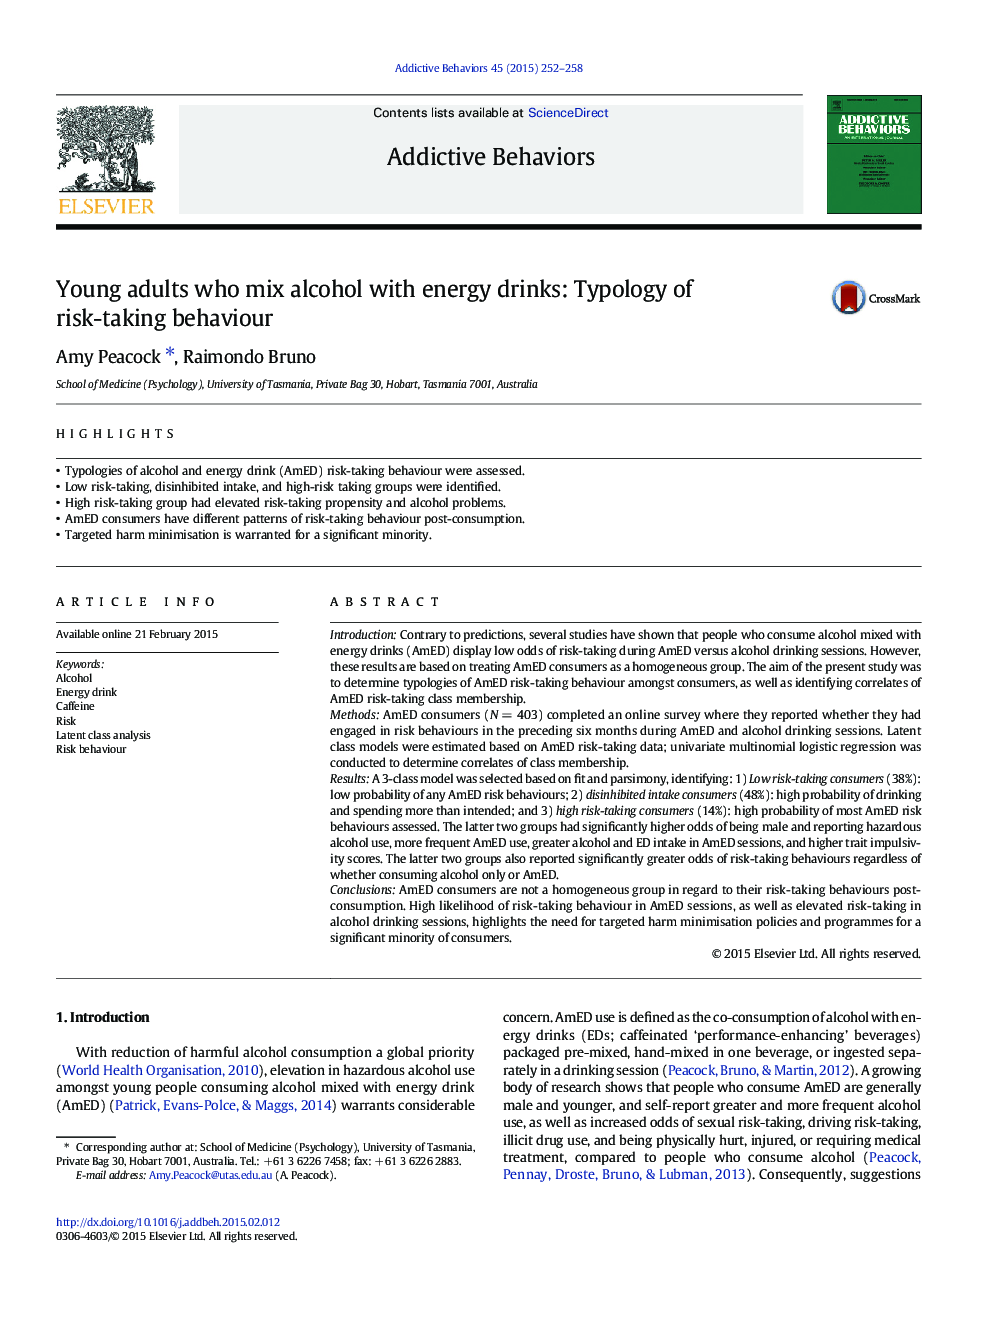 Young adults who mix alcohol with energy drinks: Typology of risk-taking behaviour